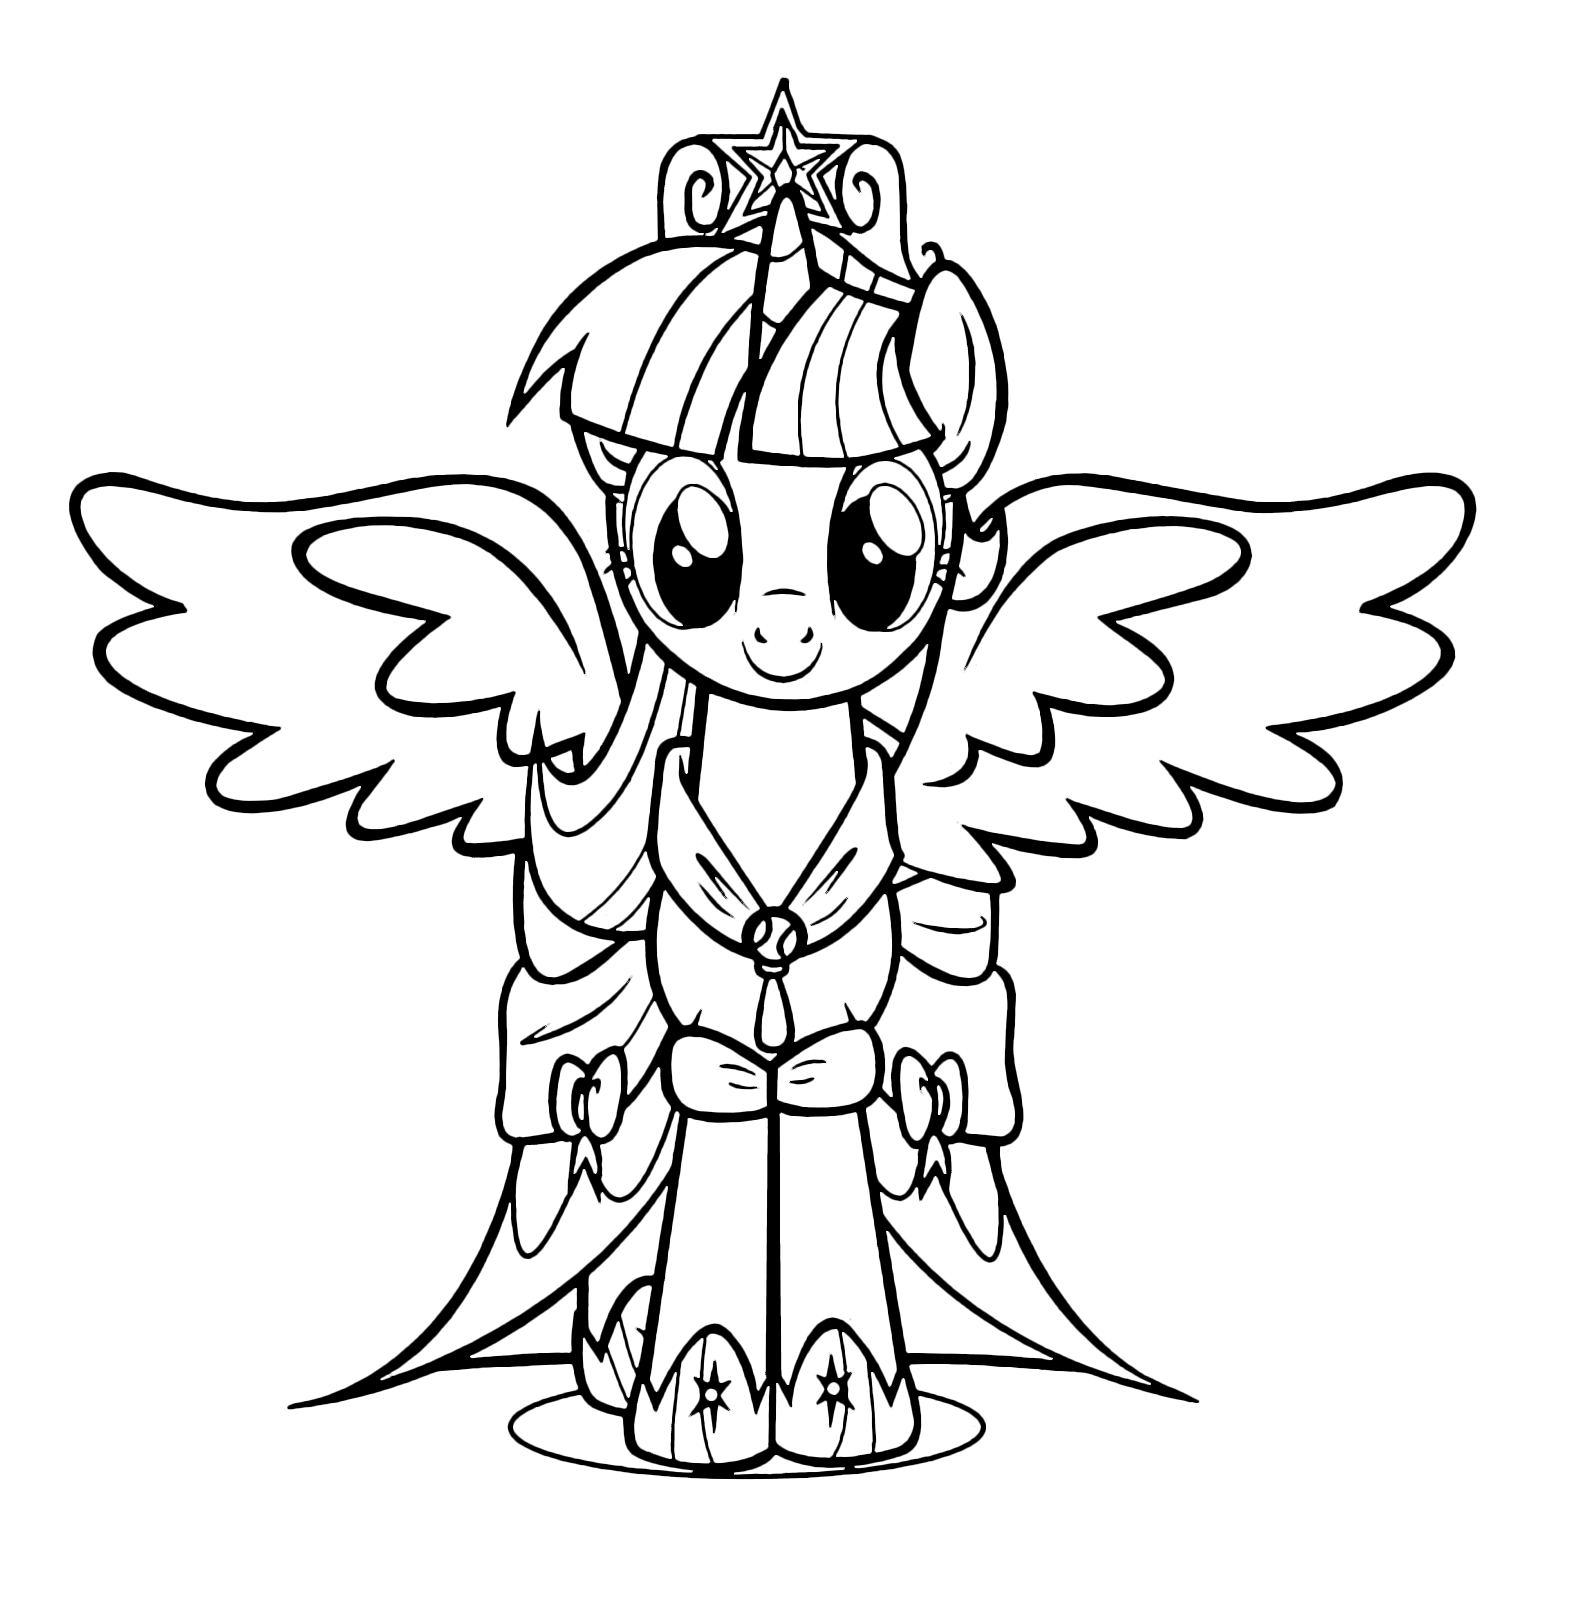 My Little Pony - Twilight Sparkle princess with open wings